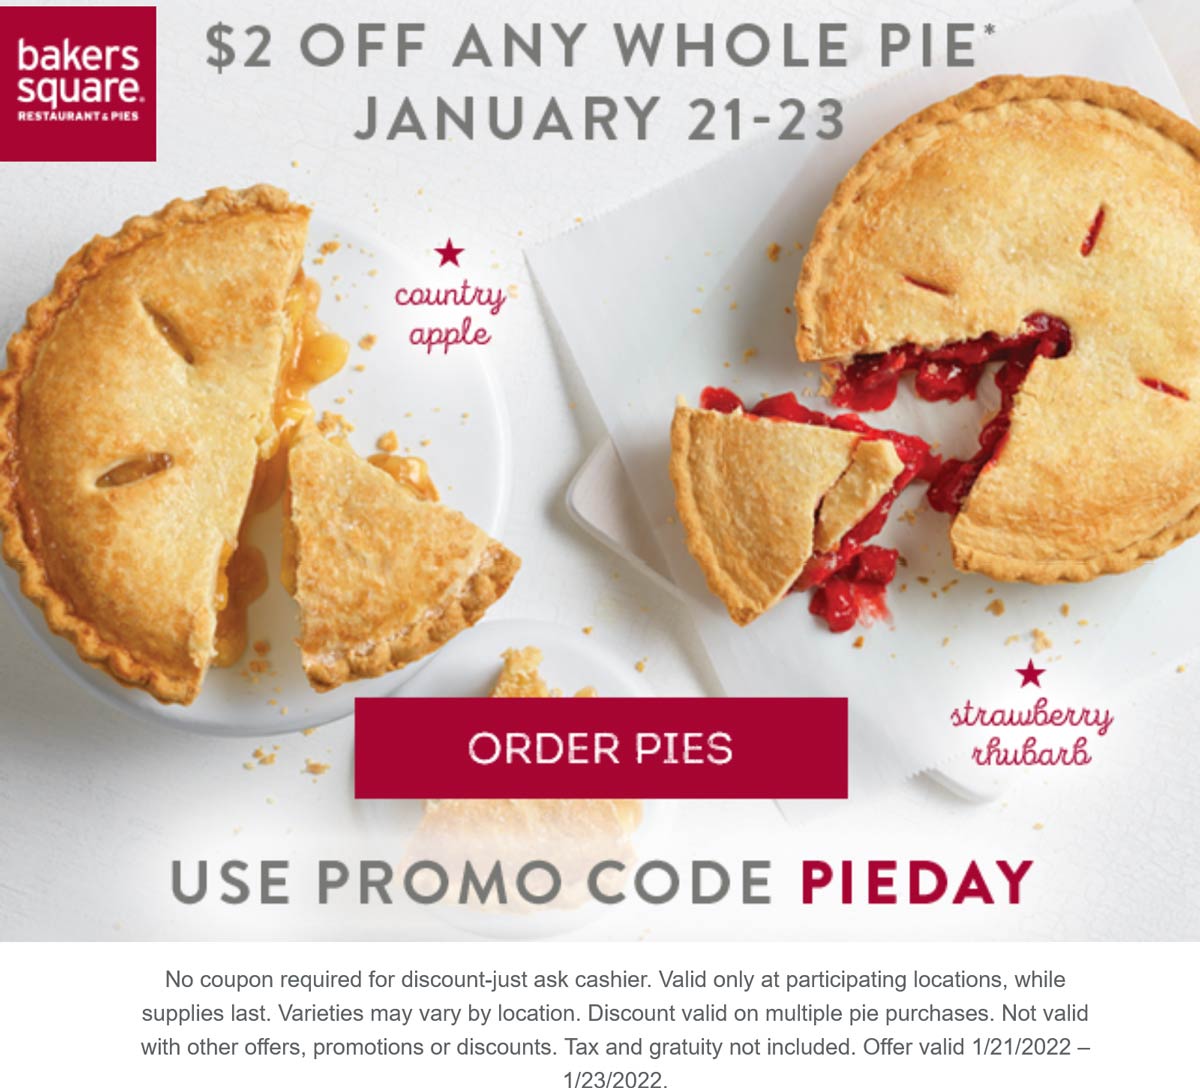 Bakers Square restaurants Coupon  $2 off any pie at Bakers Square restaurants via promo code PIEDAY #bakerssquare 